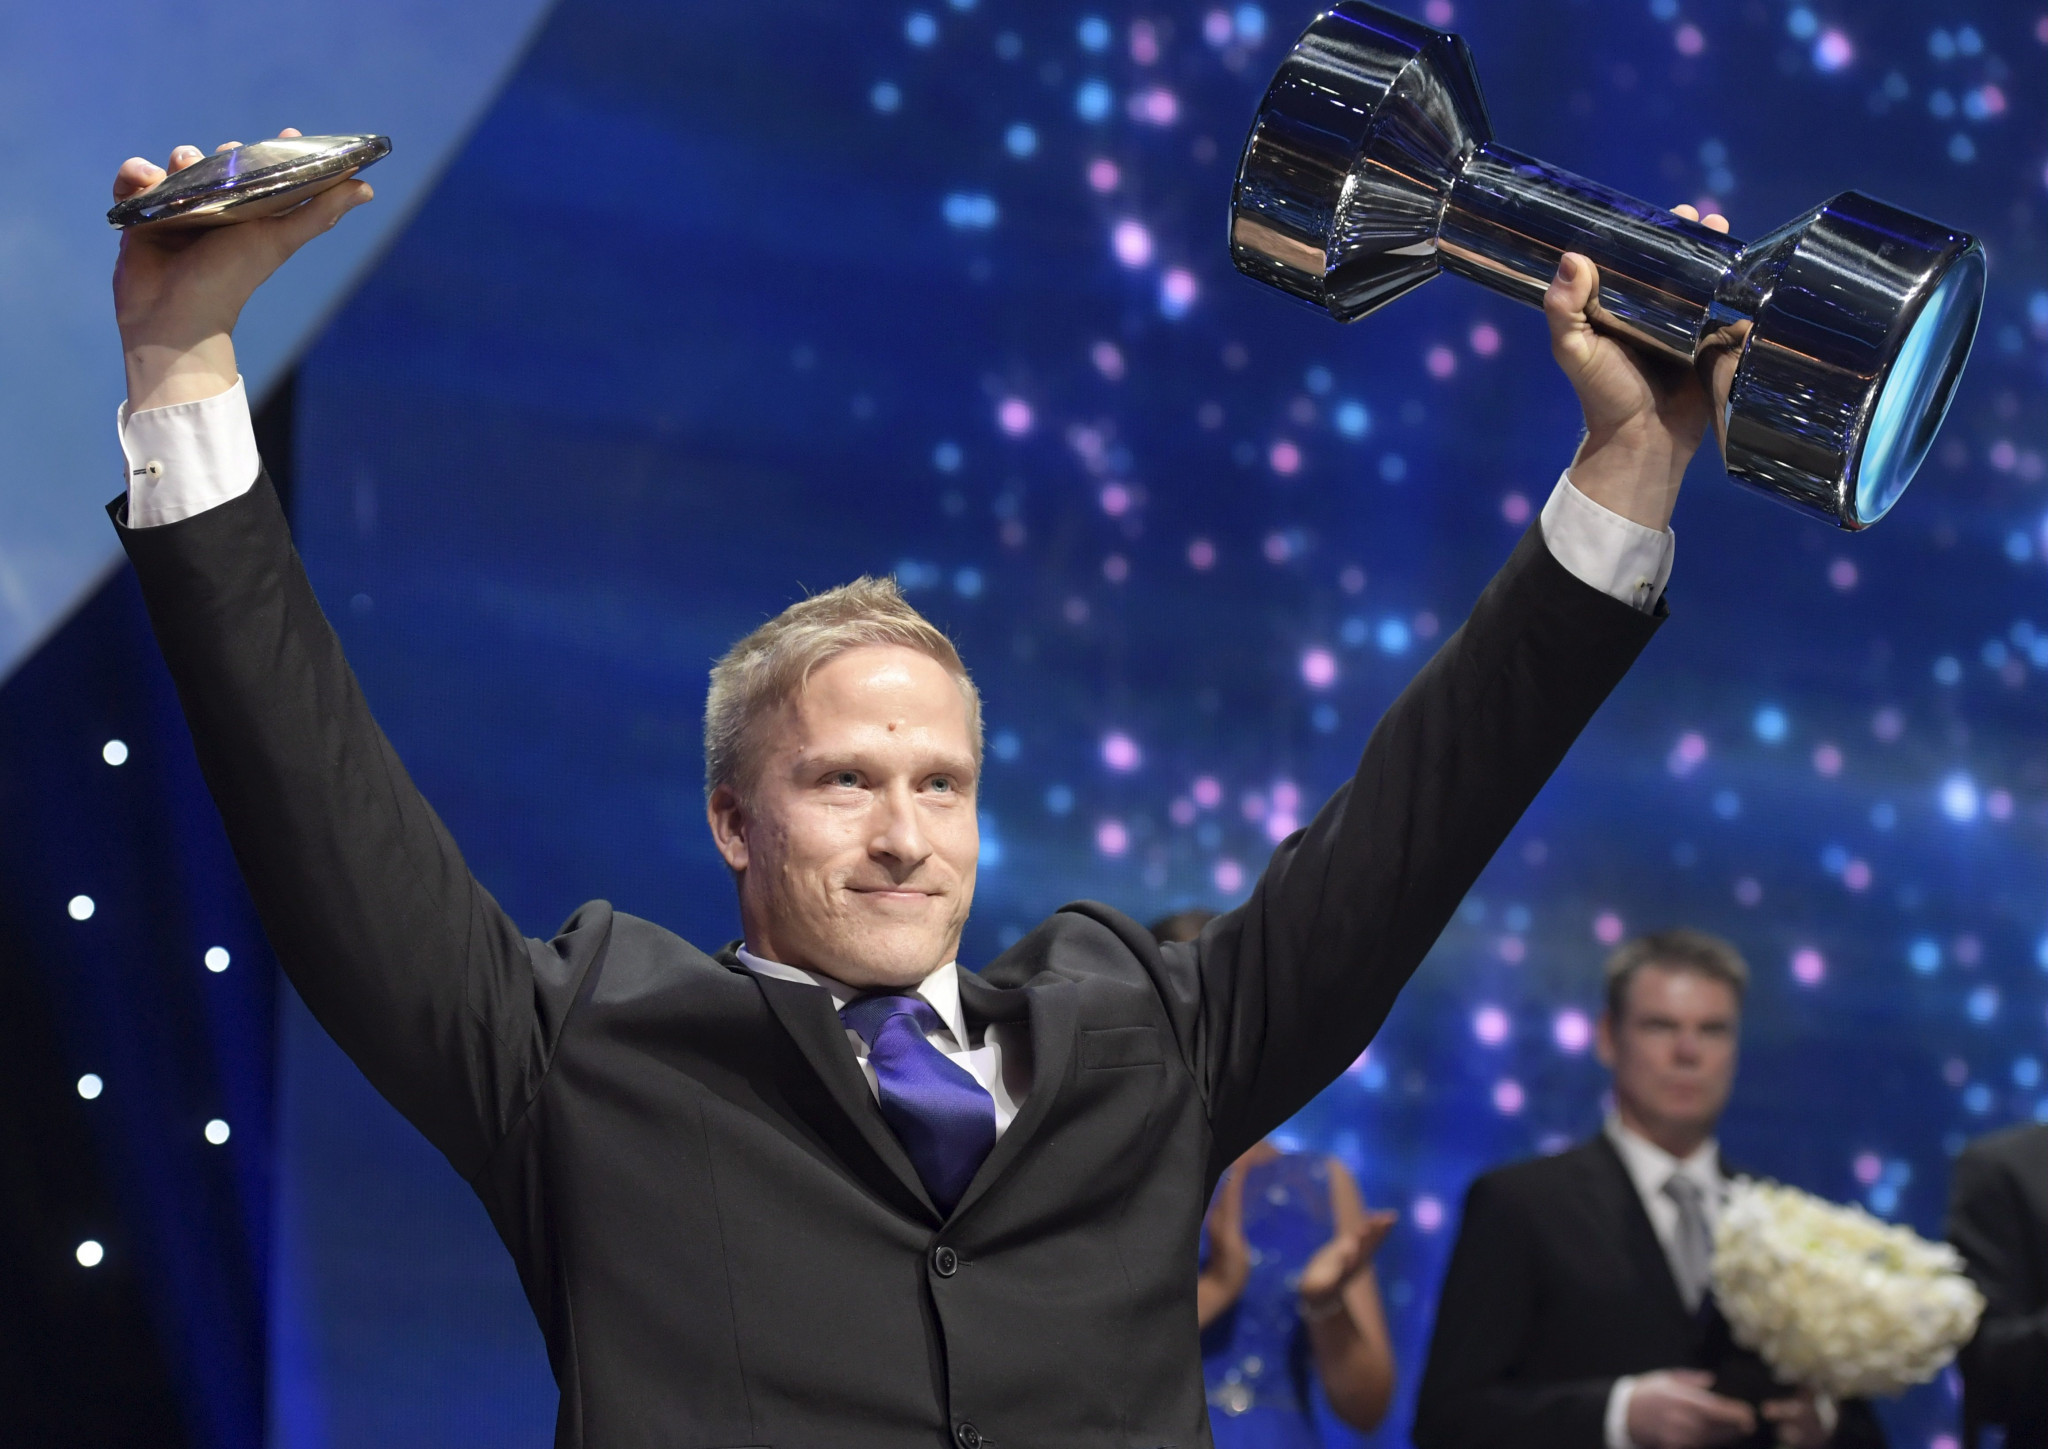 Paralympian Leo-Pekka Tähti has been named as Finland's Athlete of the Year ©Getty Images